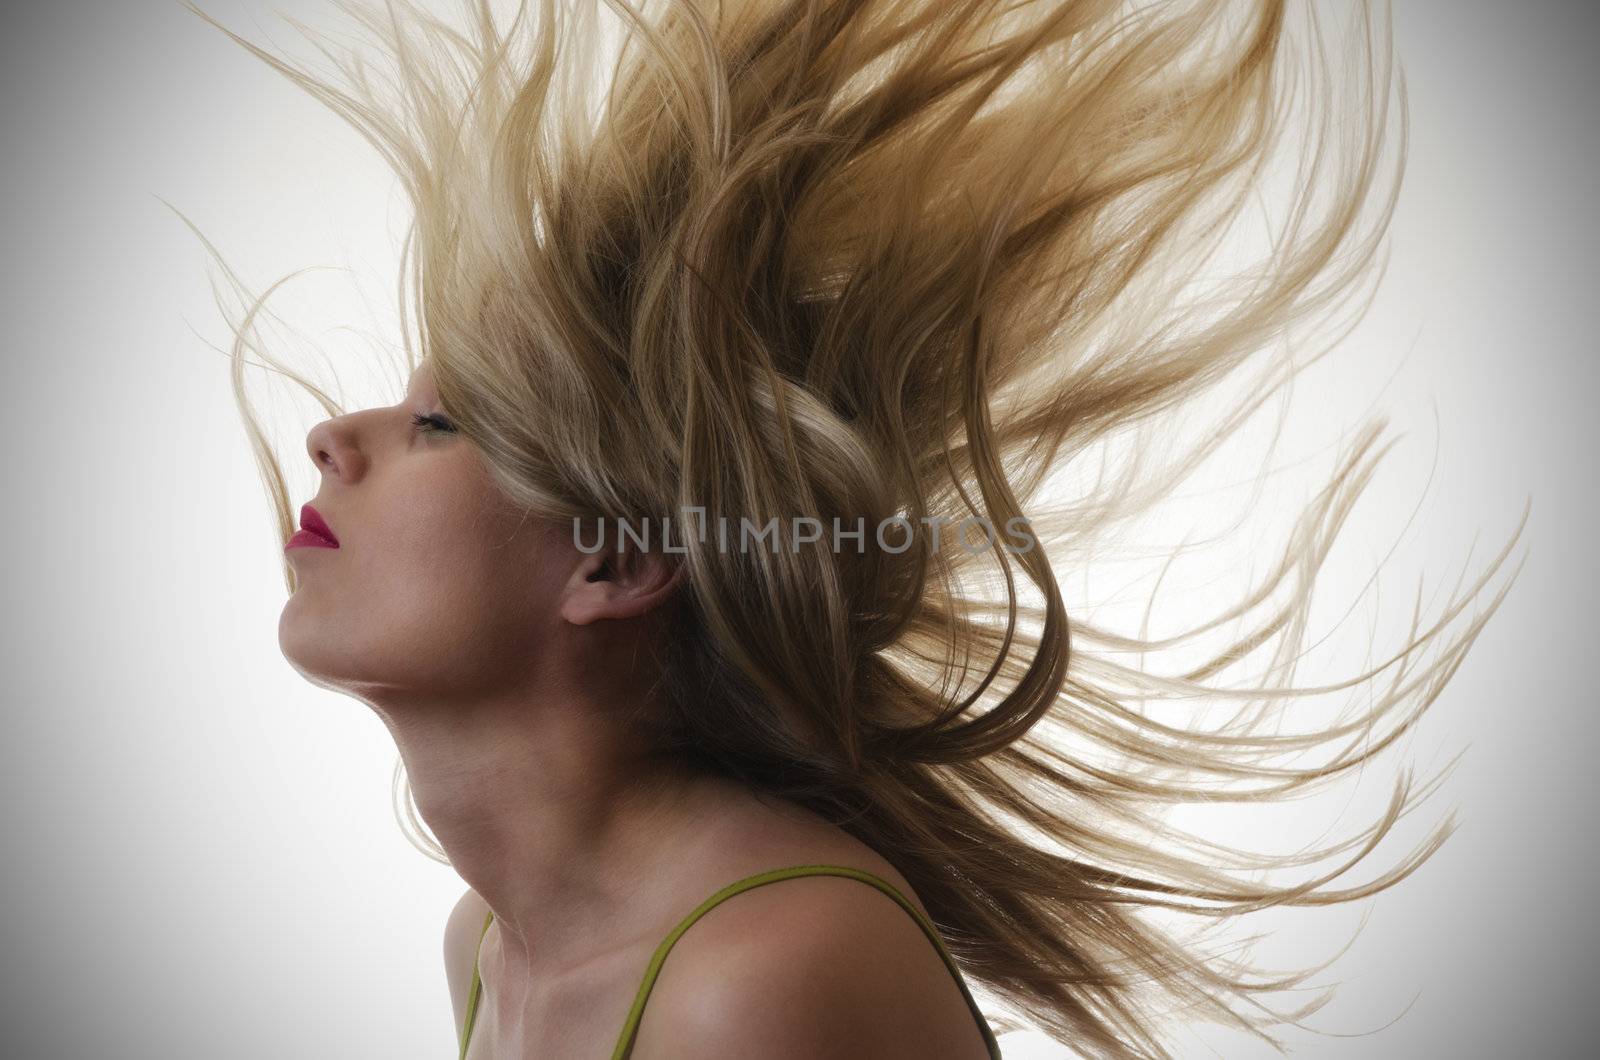 portrait of a woman with hair flying in the air